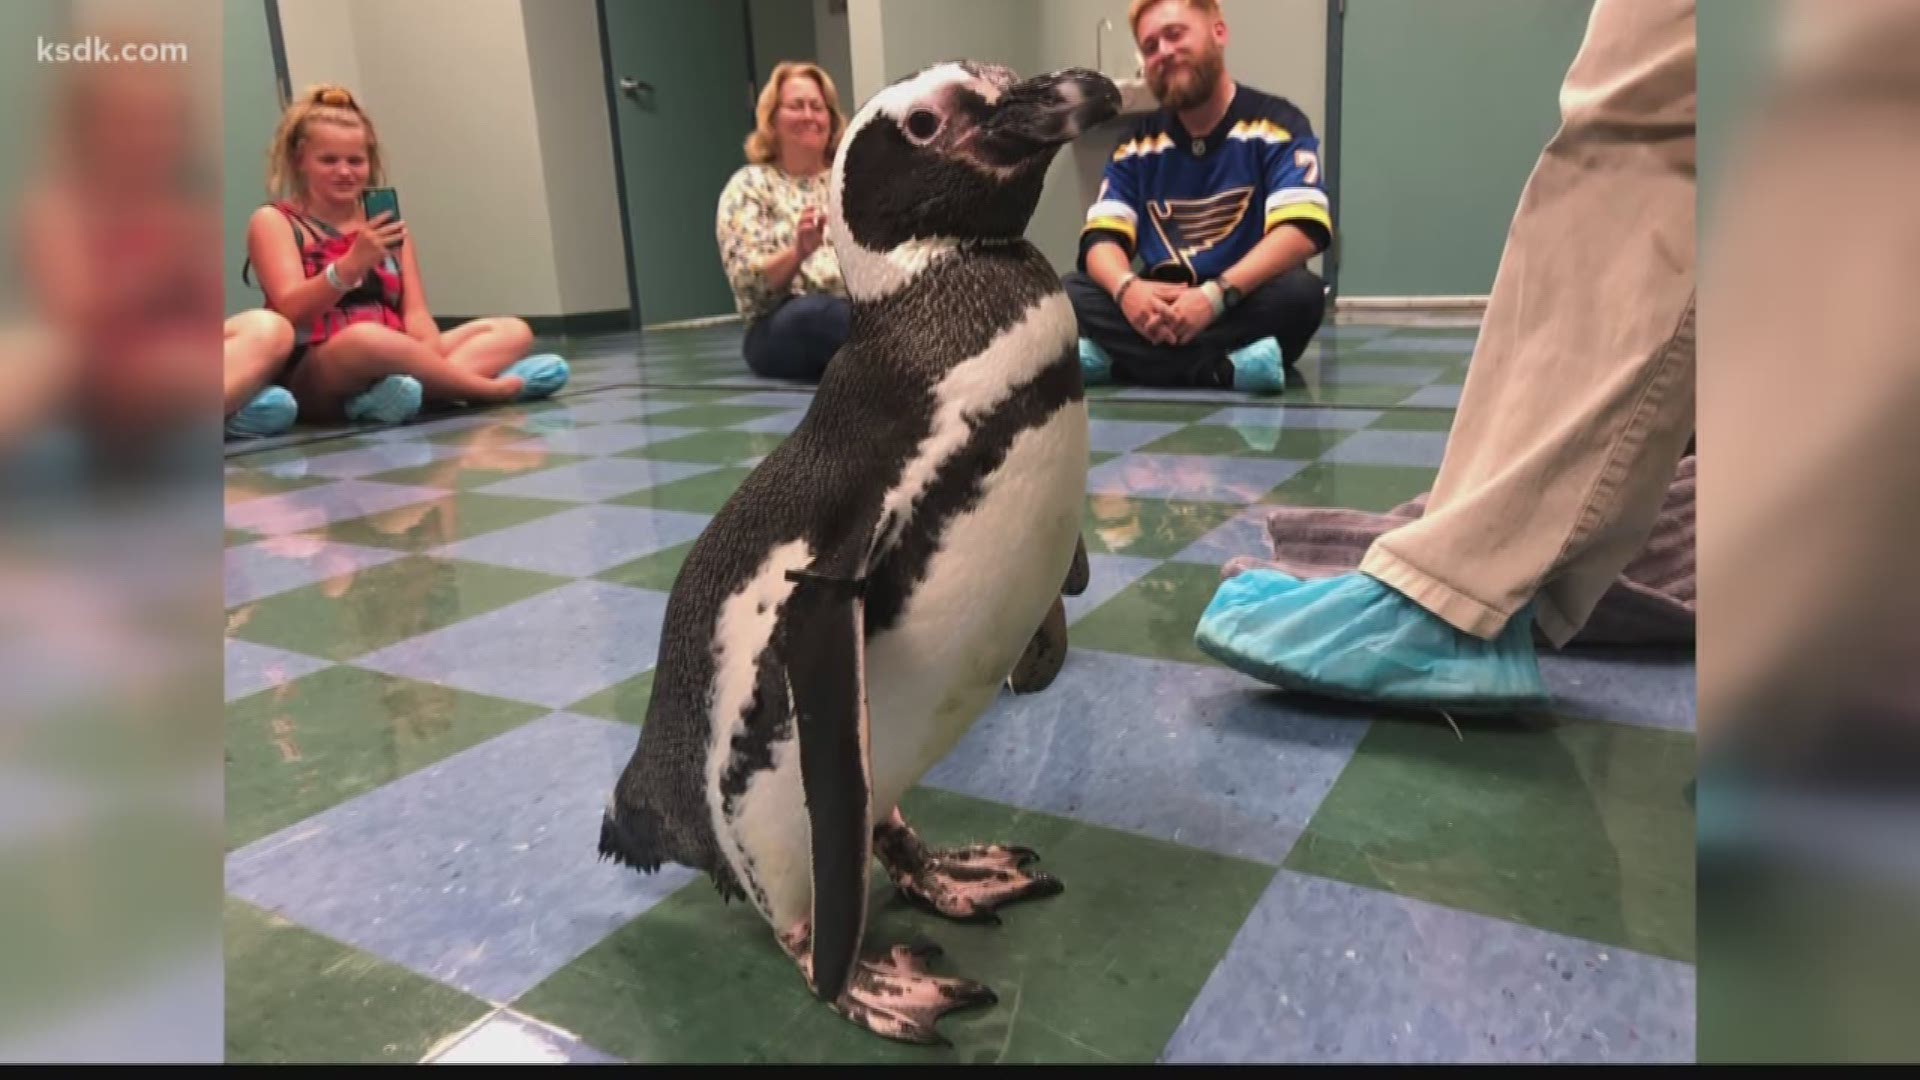 The Saint Louis Zoo is home to more than 80 penguins... and thanks to some of their behind-the-scenes tours, you can now meet some of them. It's an experience you'll never forget!